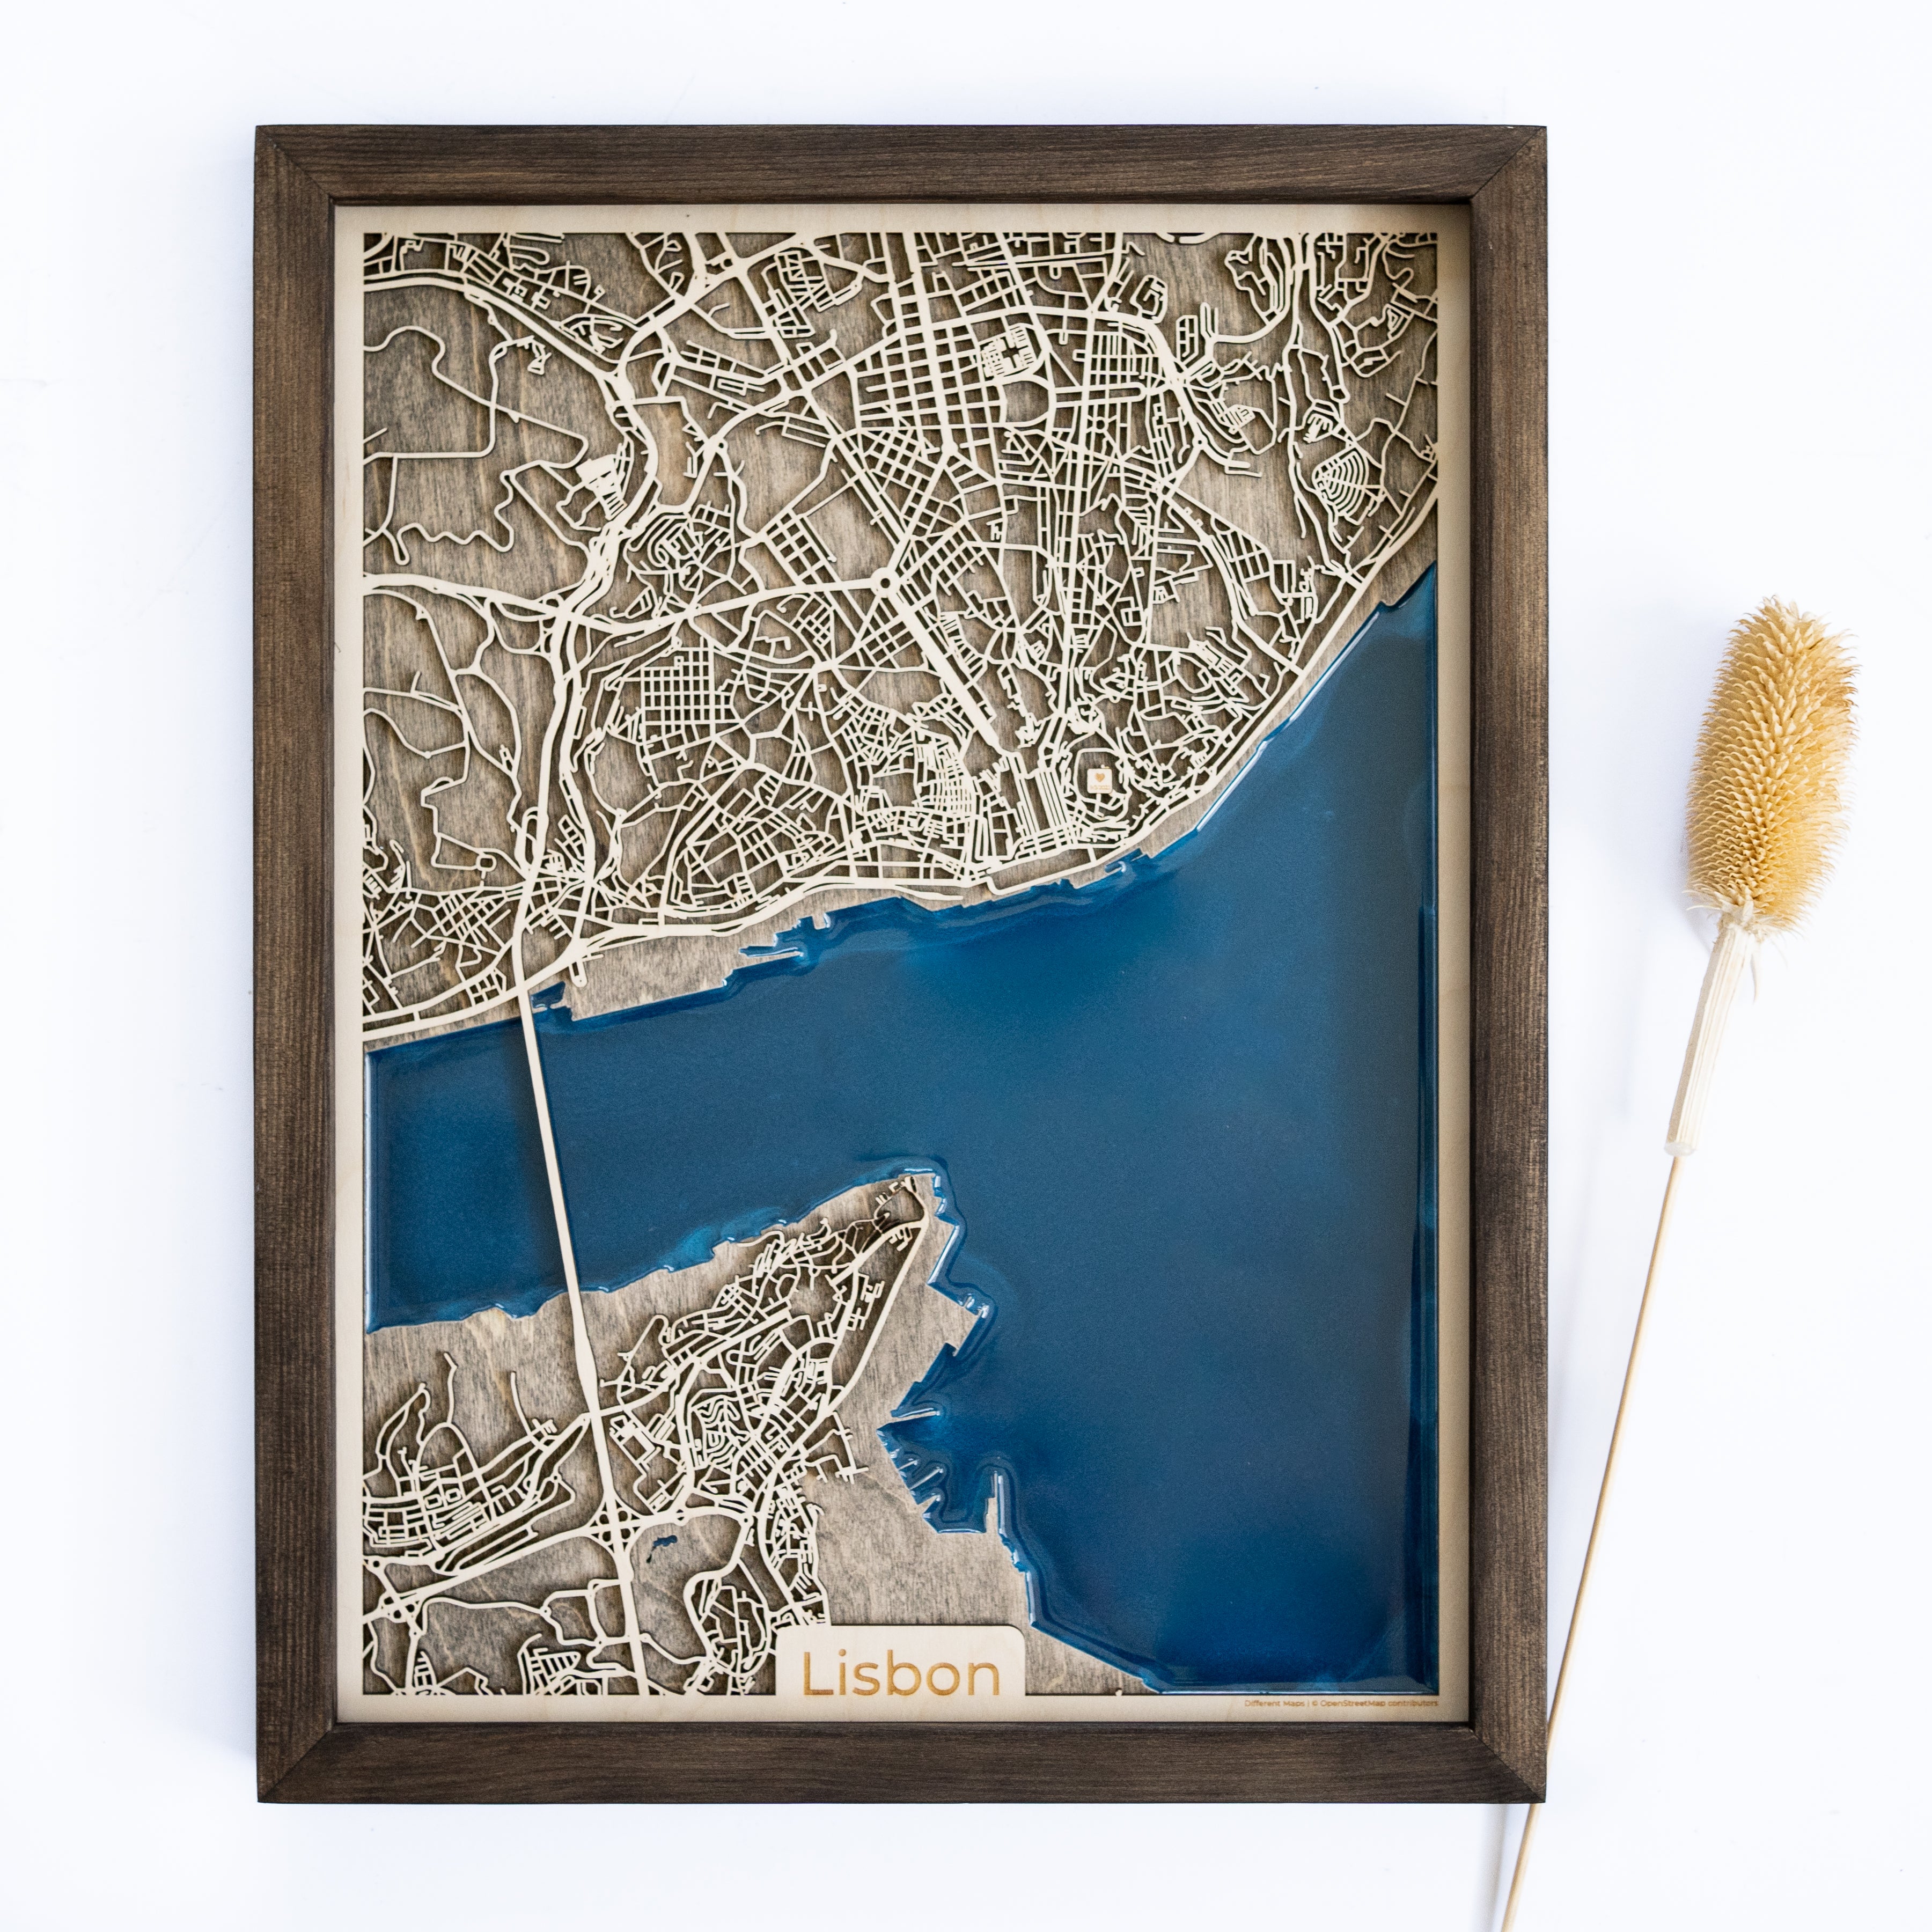 Designed with precision and attention to detail, our Lisbon Map captures the essence of this vibrant city, from its charming neighborhoods to iconic landmarks.